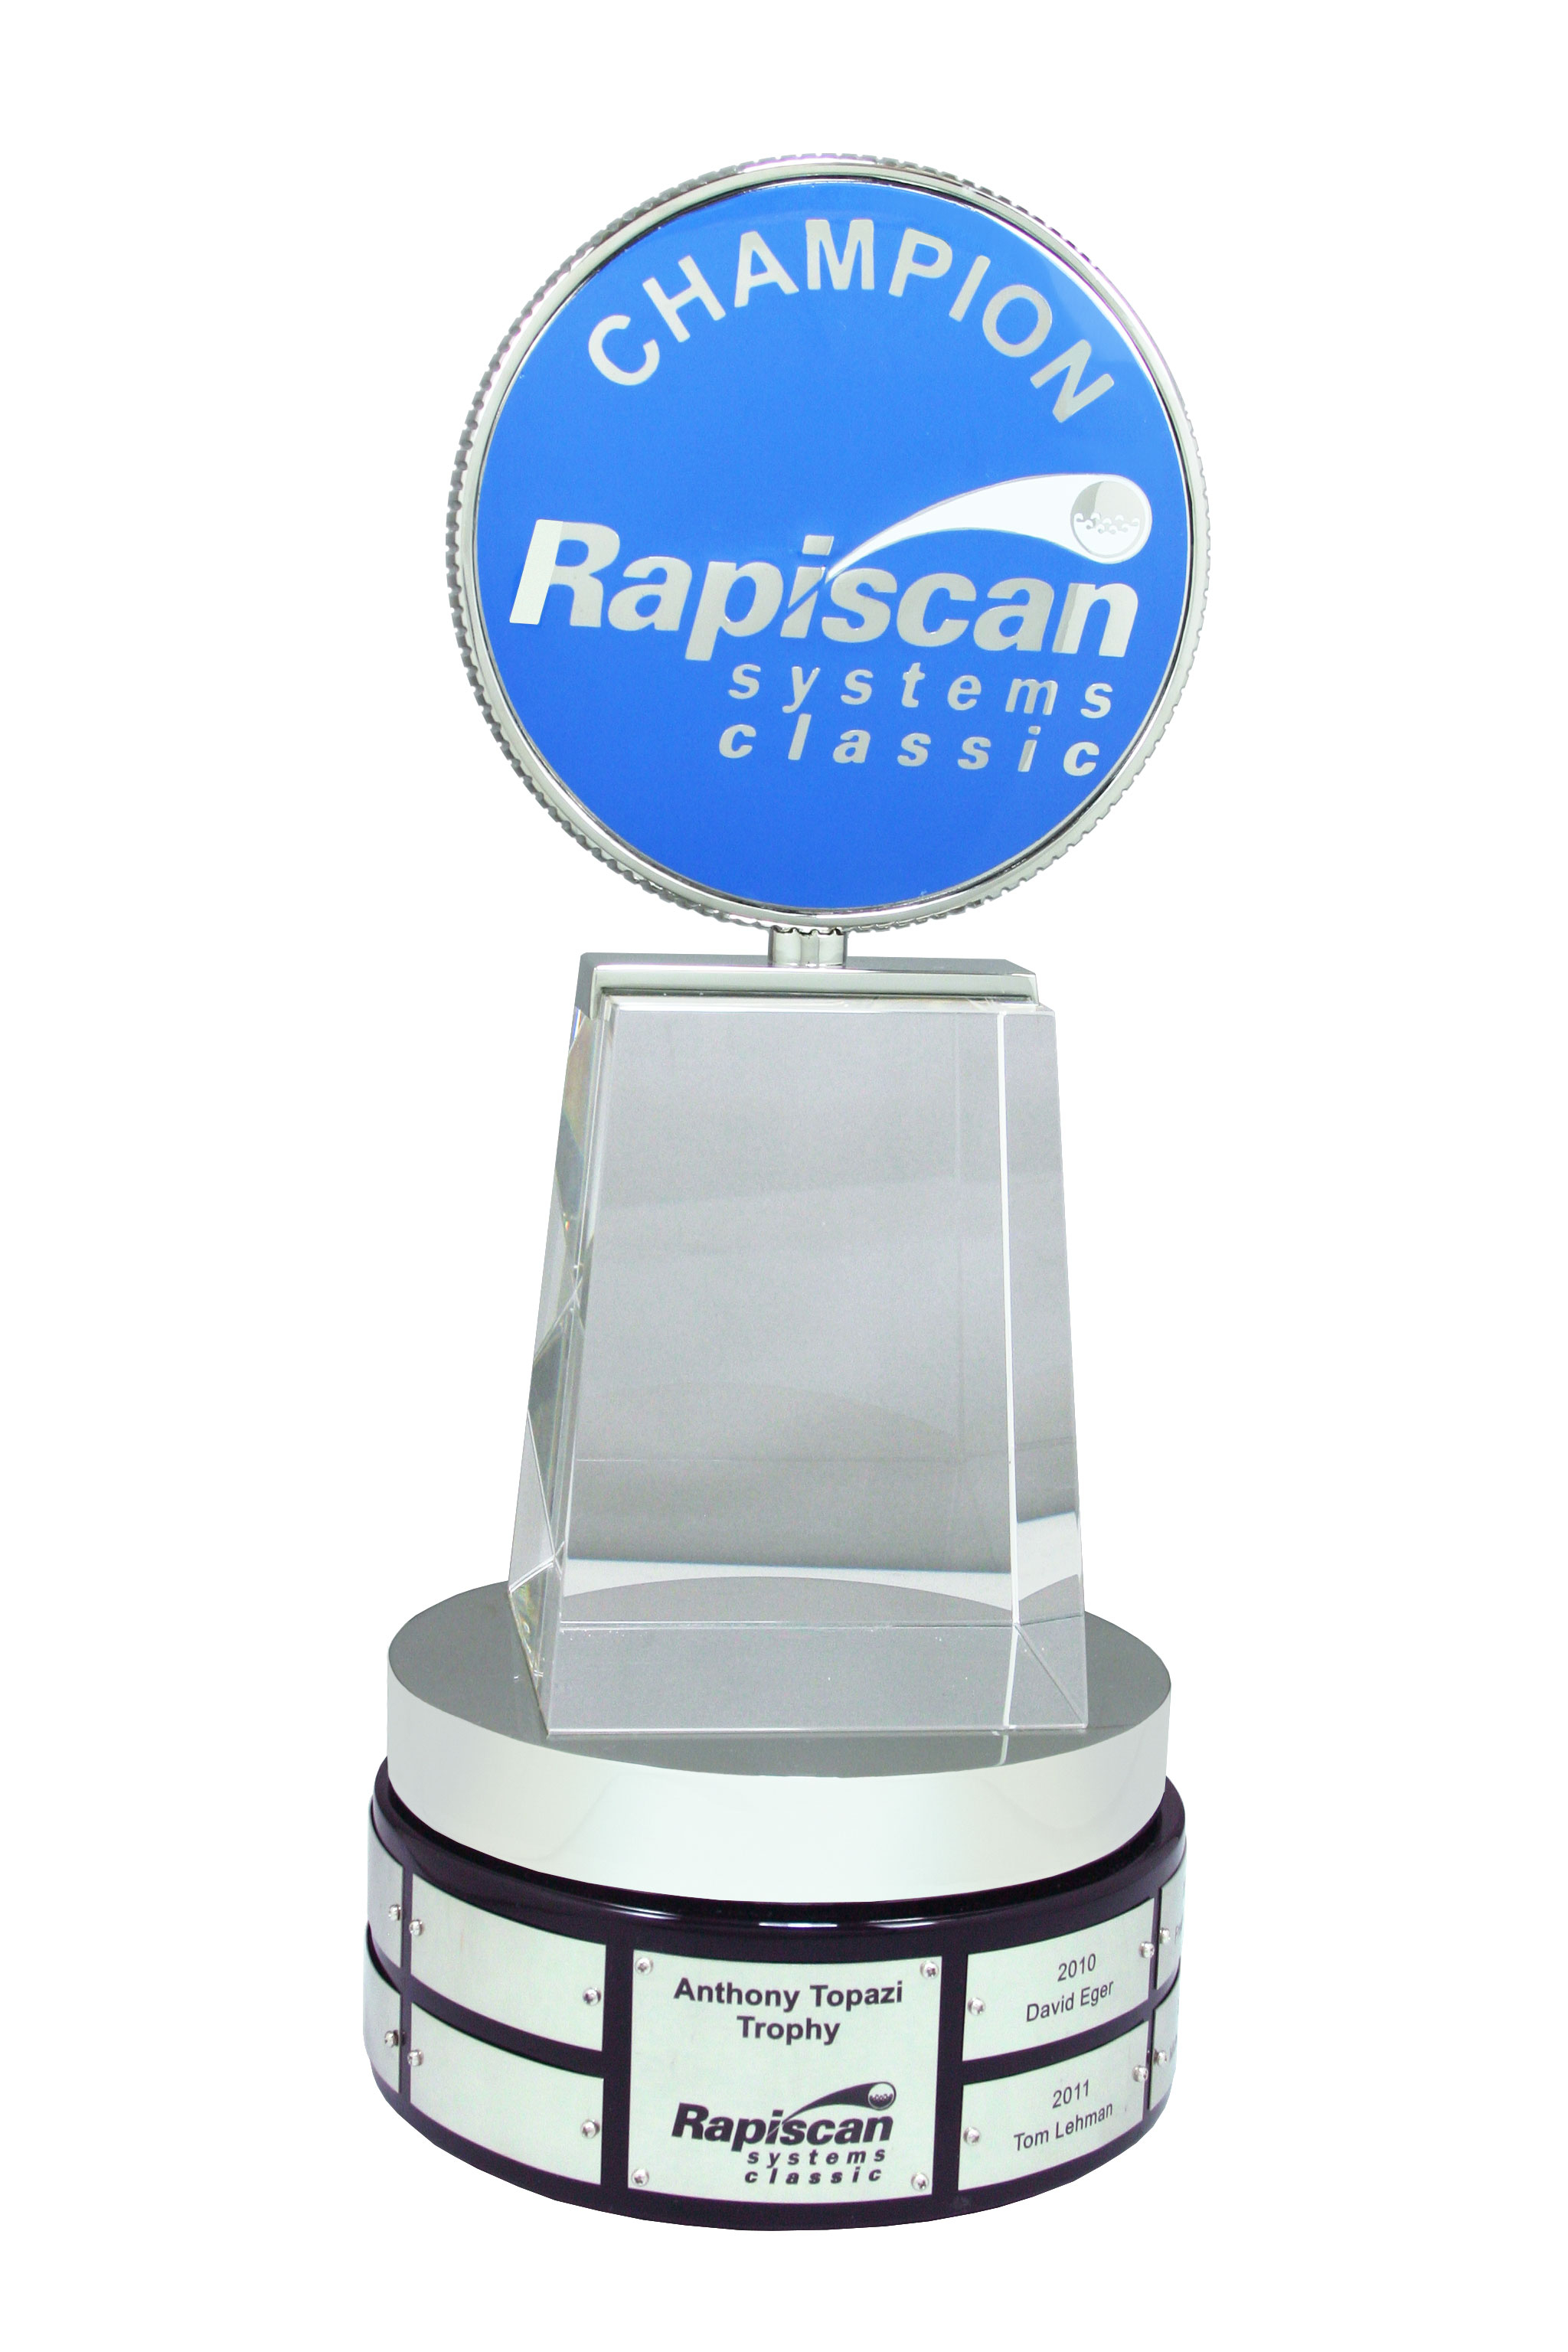 Rapiscan Systems Classic Trophy Front View